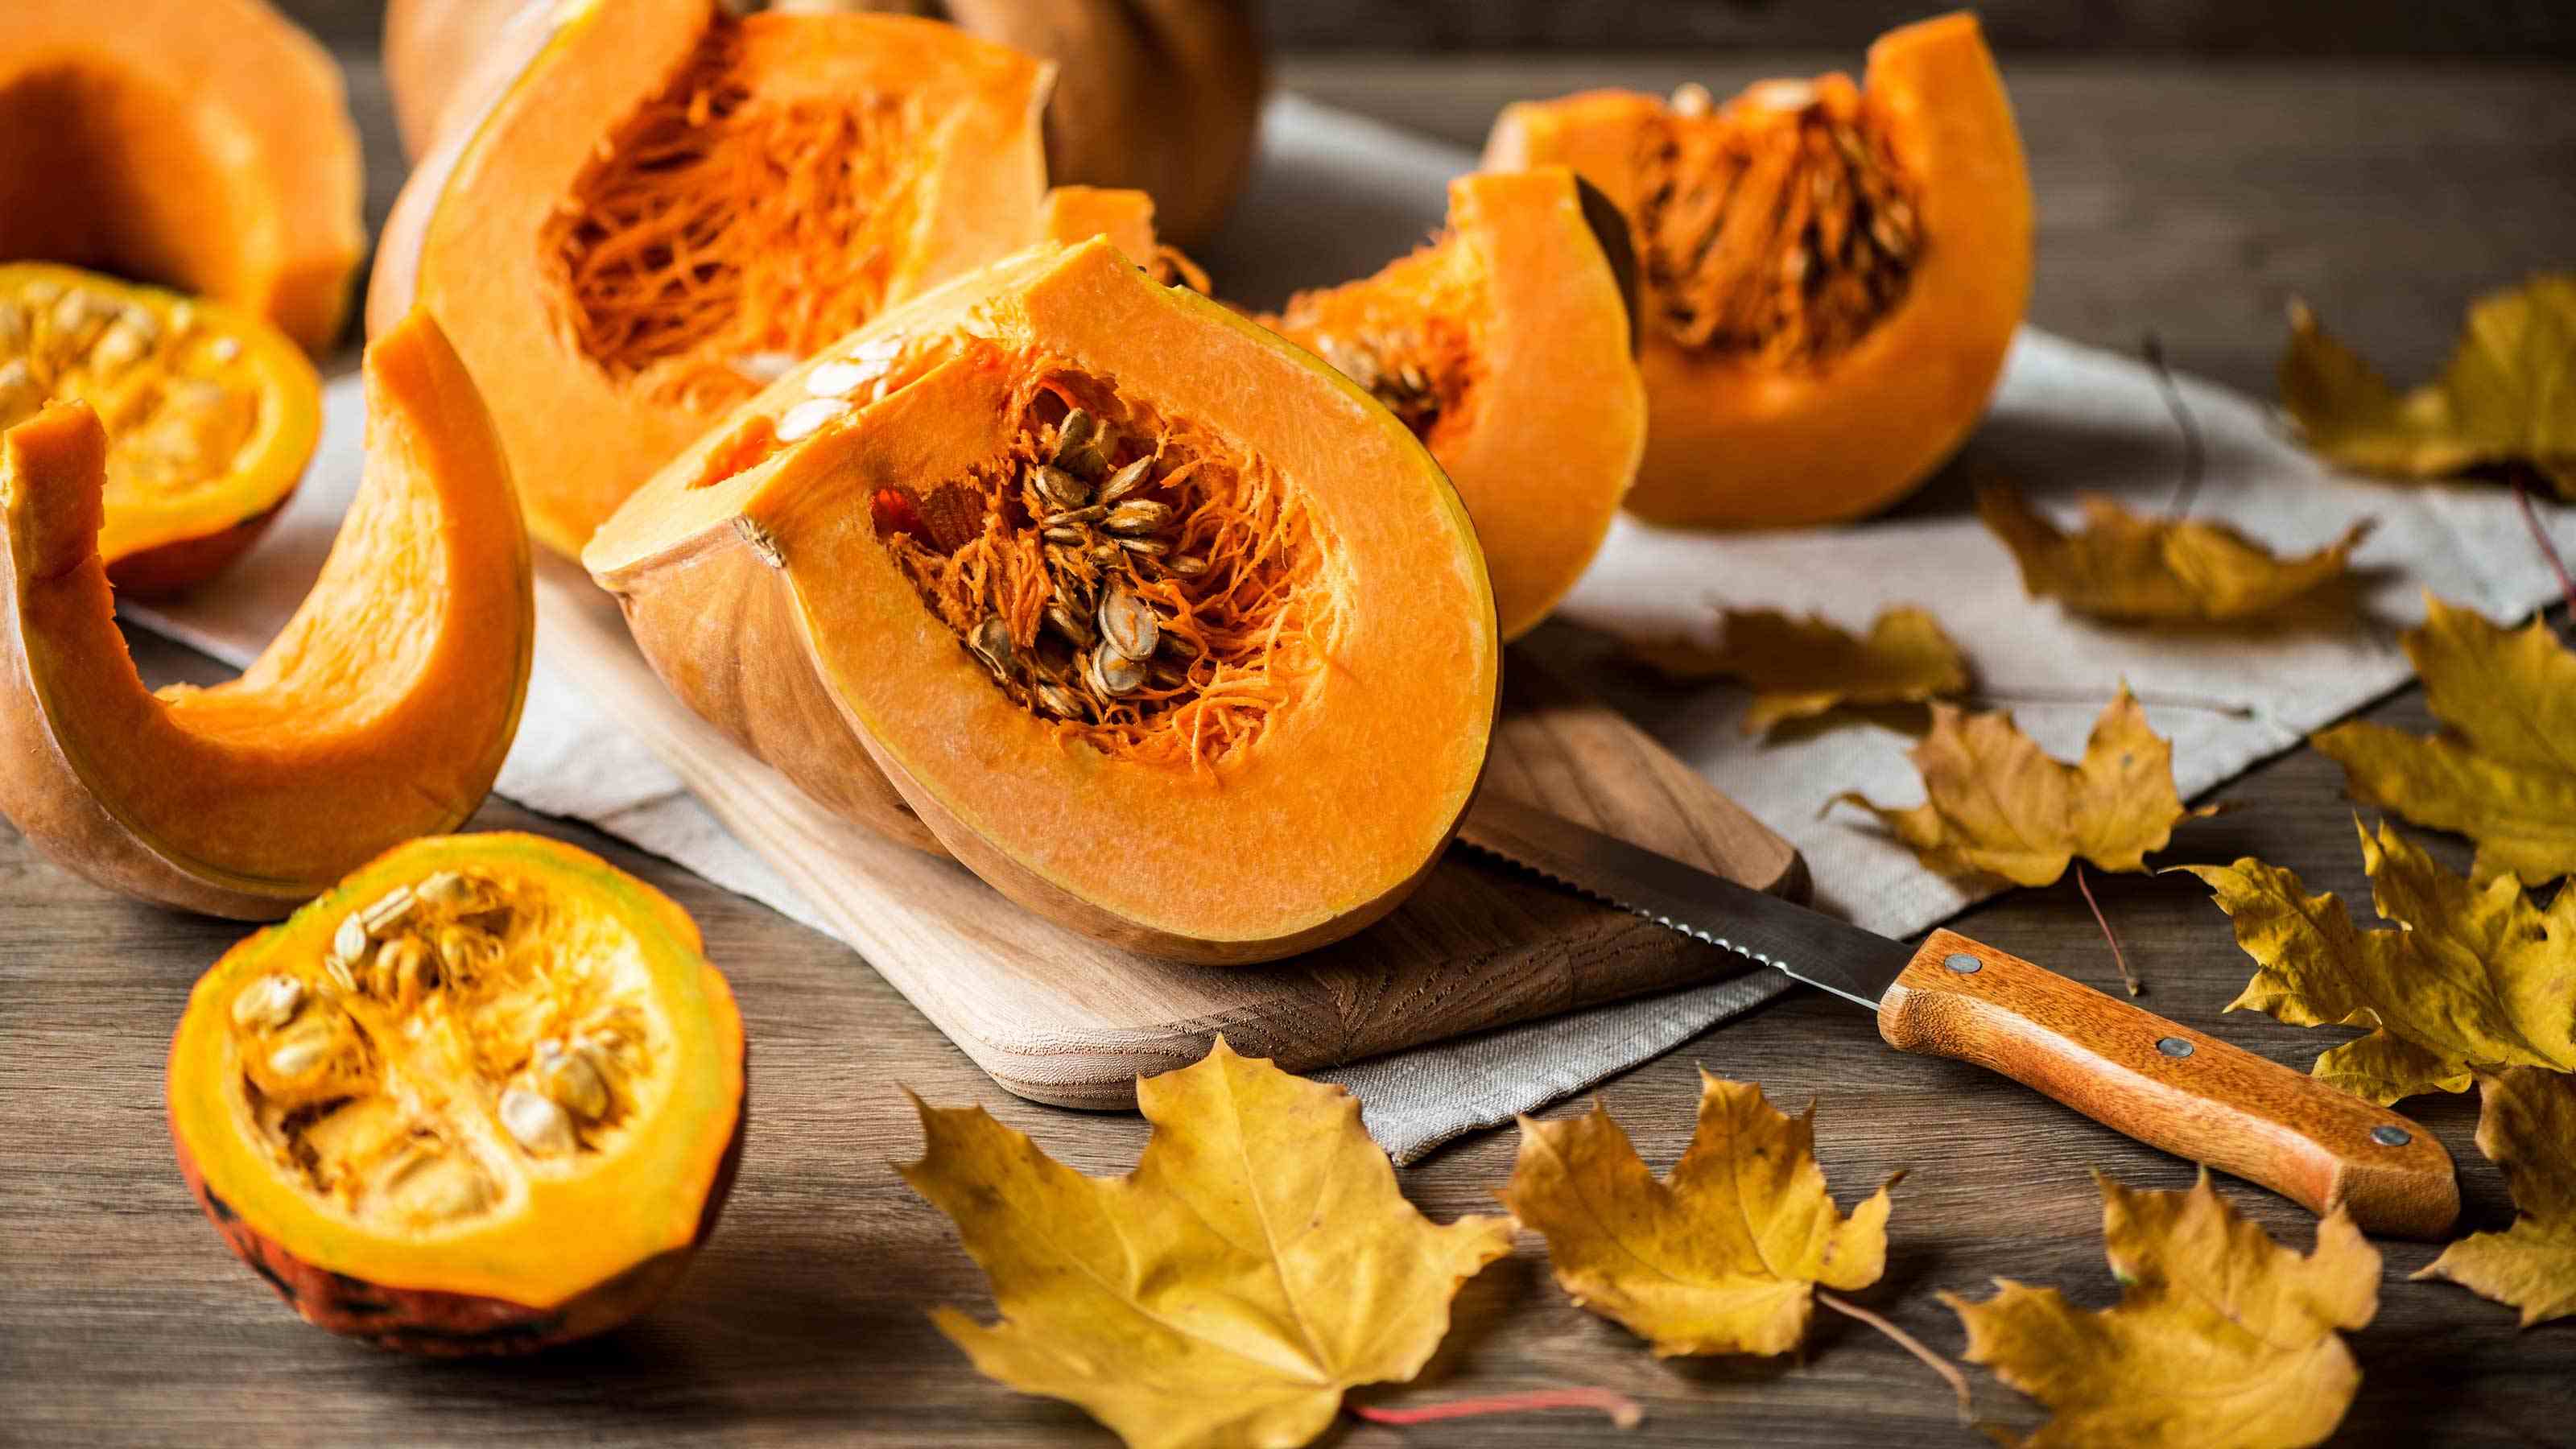 How To Separate Pumpkin Seeds From Pulp